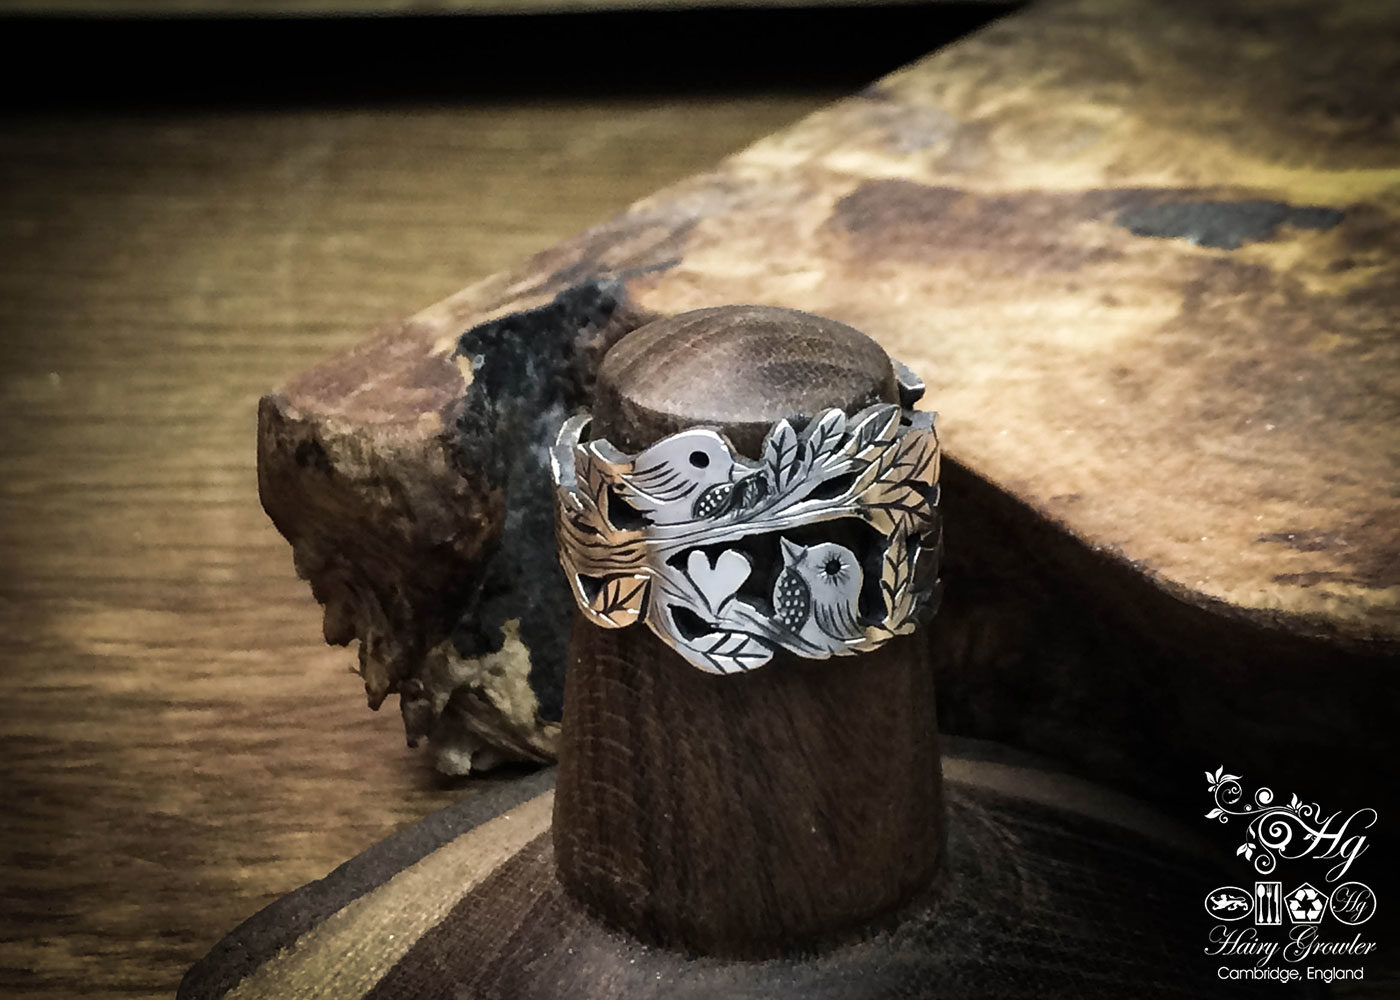 handcrafted, recycled silver bird tweet ring made from old silver spoons